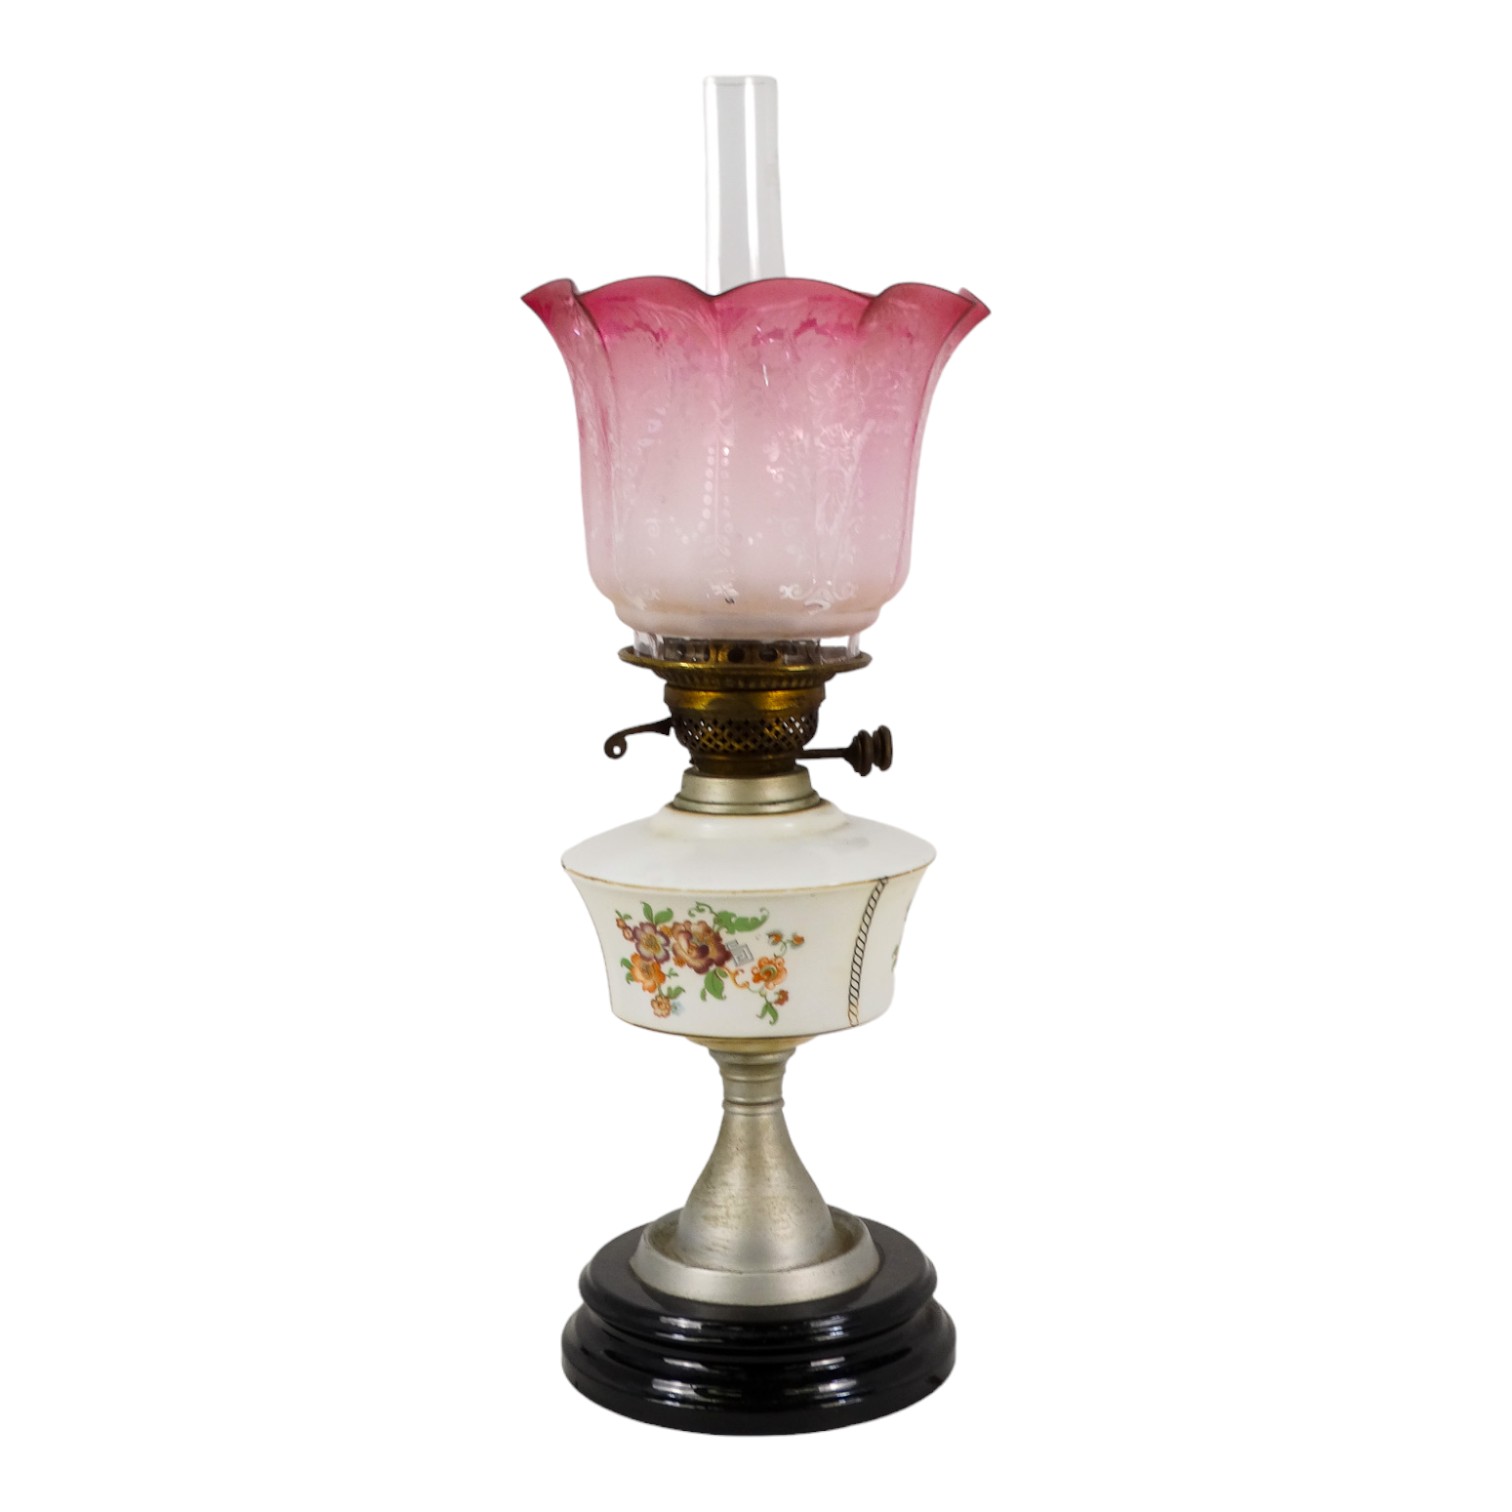 A late Victorian oil lamp - the milk glass reservoir decorated with flowers and an etched glass - Image 3 of 8